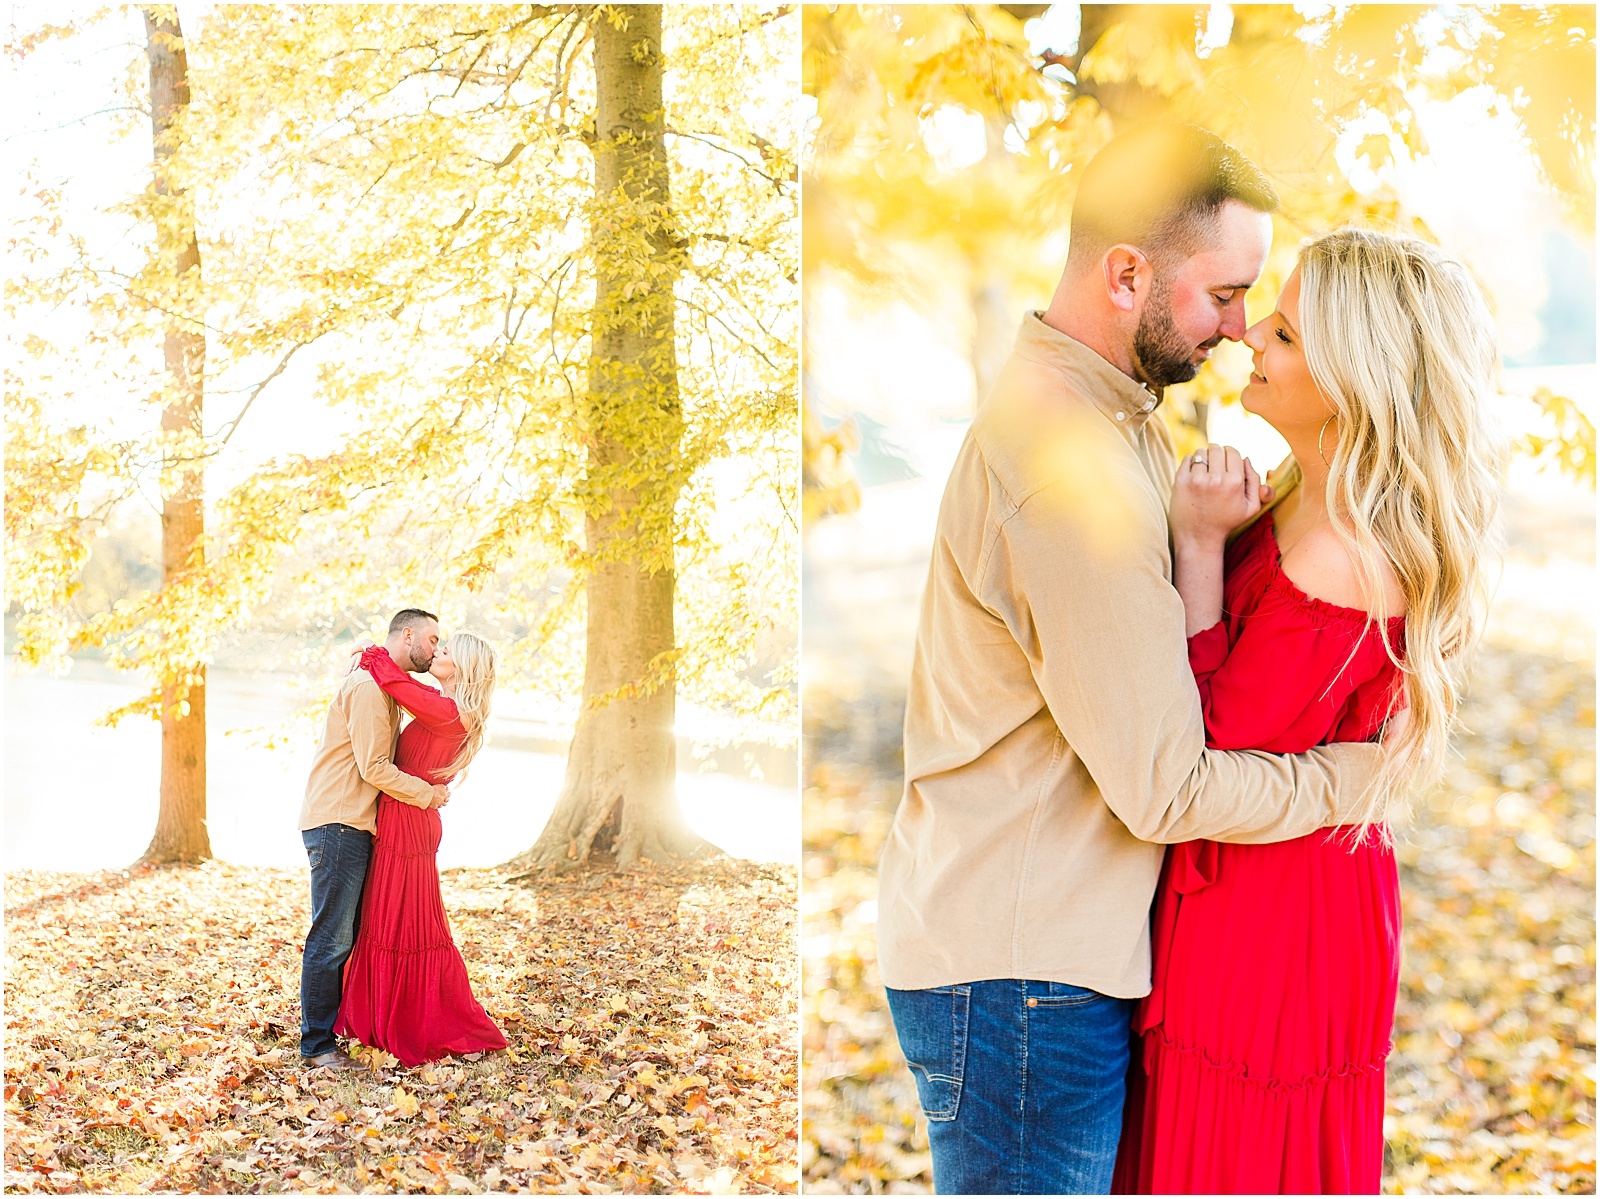 A Southern Indiana Engagement Session | Charleston and Erin | Bret and Brandie Photography023.jpg